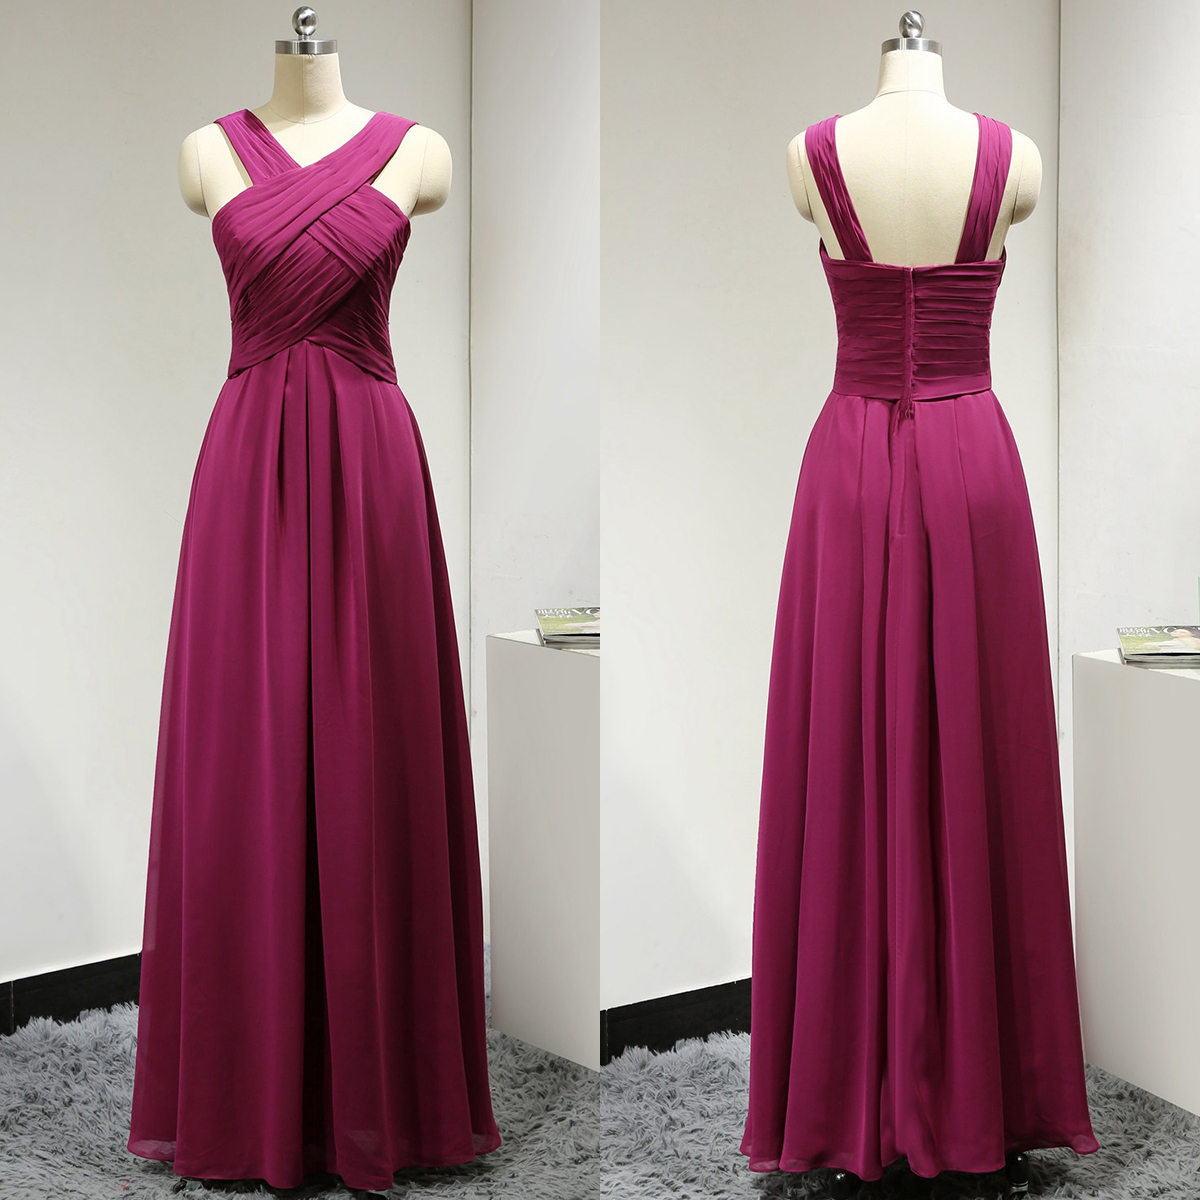 Halter A-line Bridesmaid Dress With Ruching Detail, V-neck Light Purple Bridesmaid Gowns,pl0916